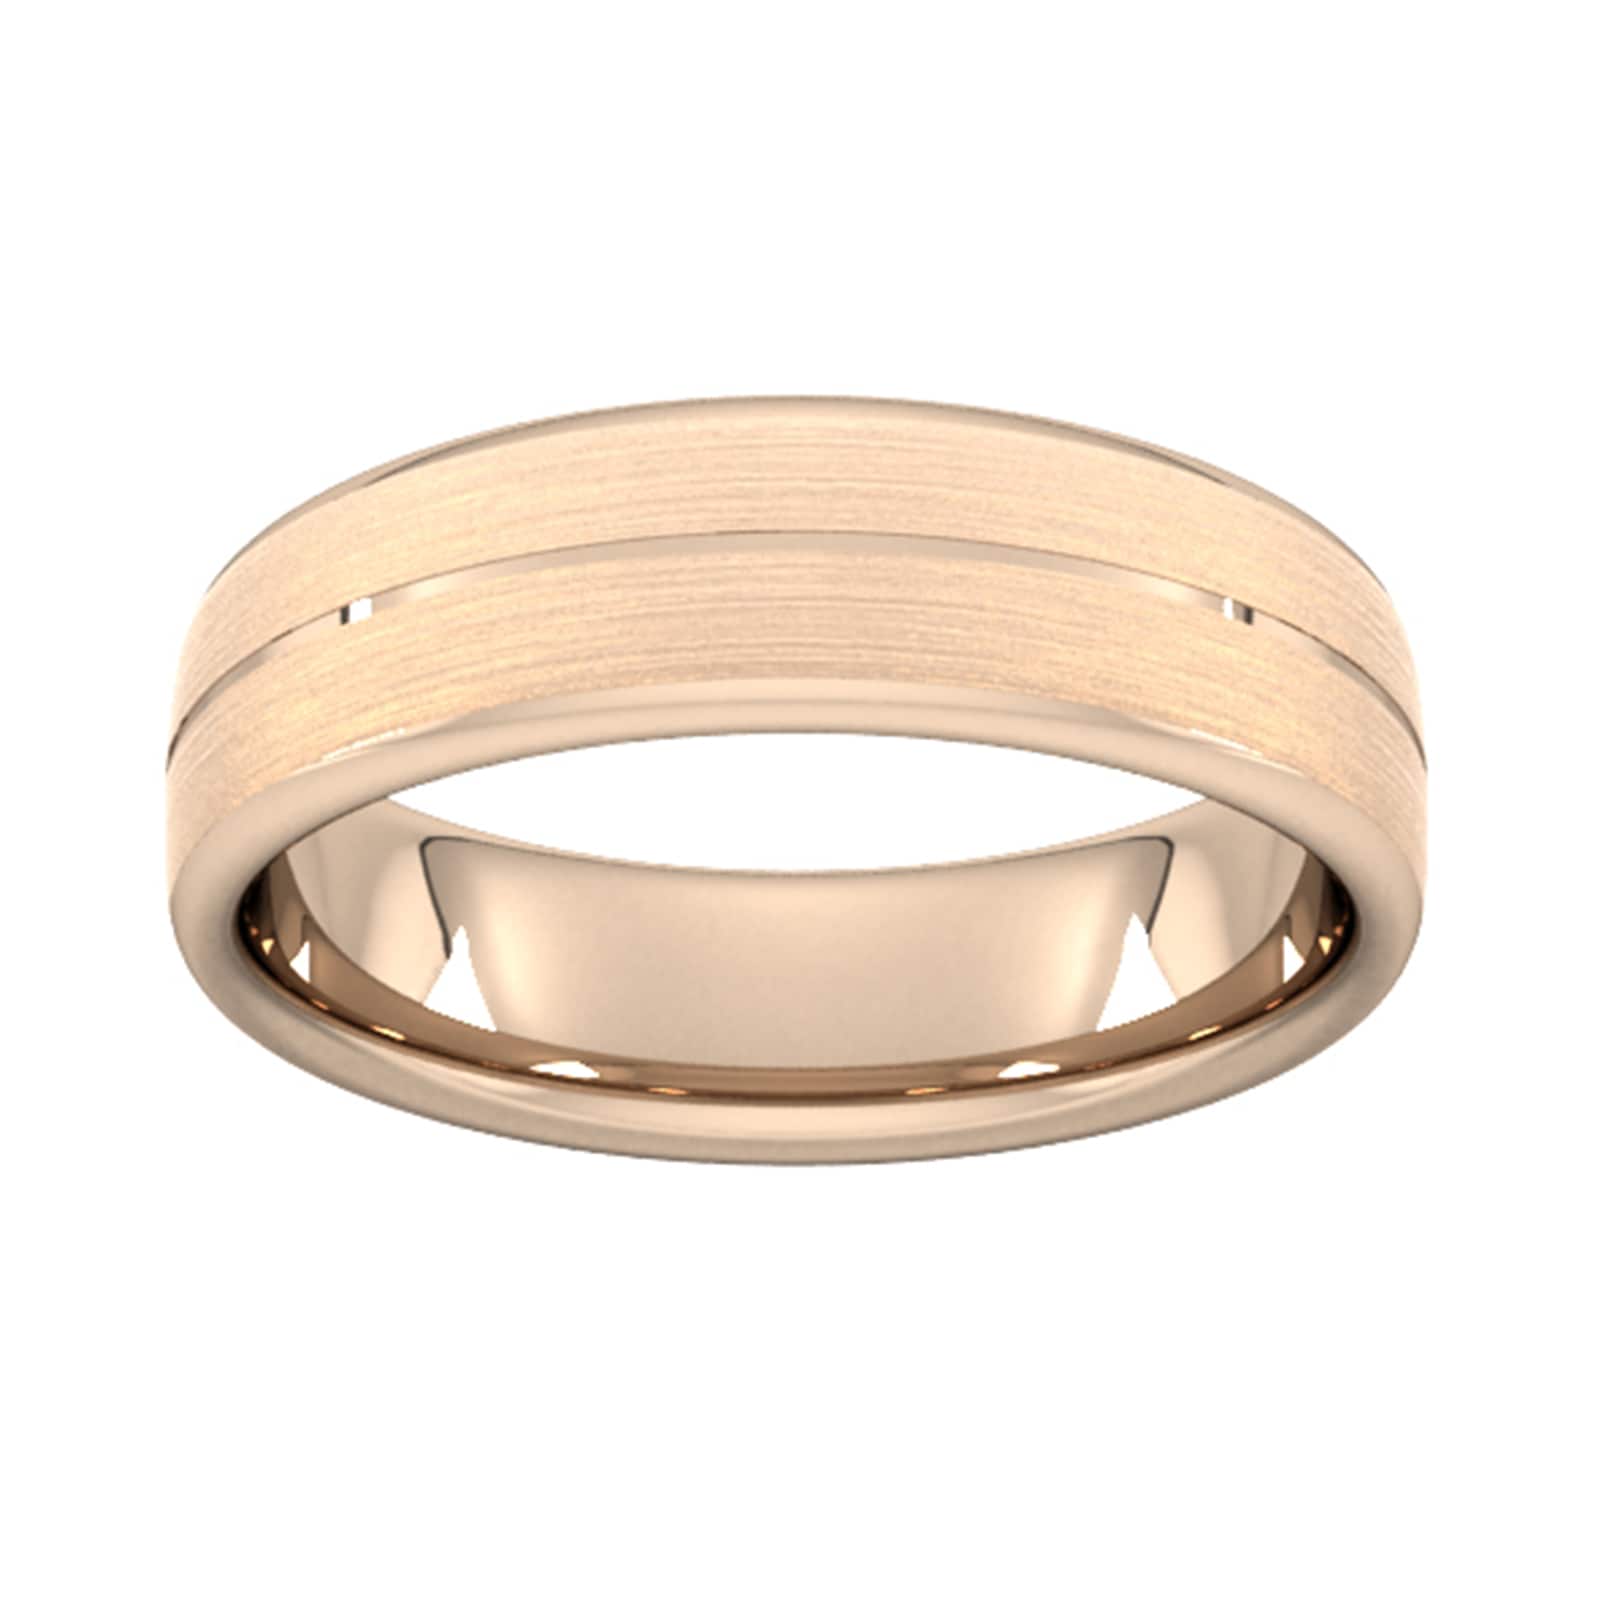 6mm Slight Court Extra Heavy Centre Groove With Chamfered Edge Wedding Ring In 9 Carat Rose Gold - Ring Size S